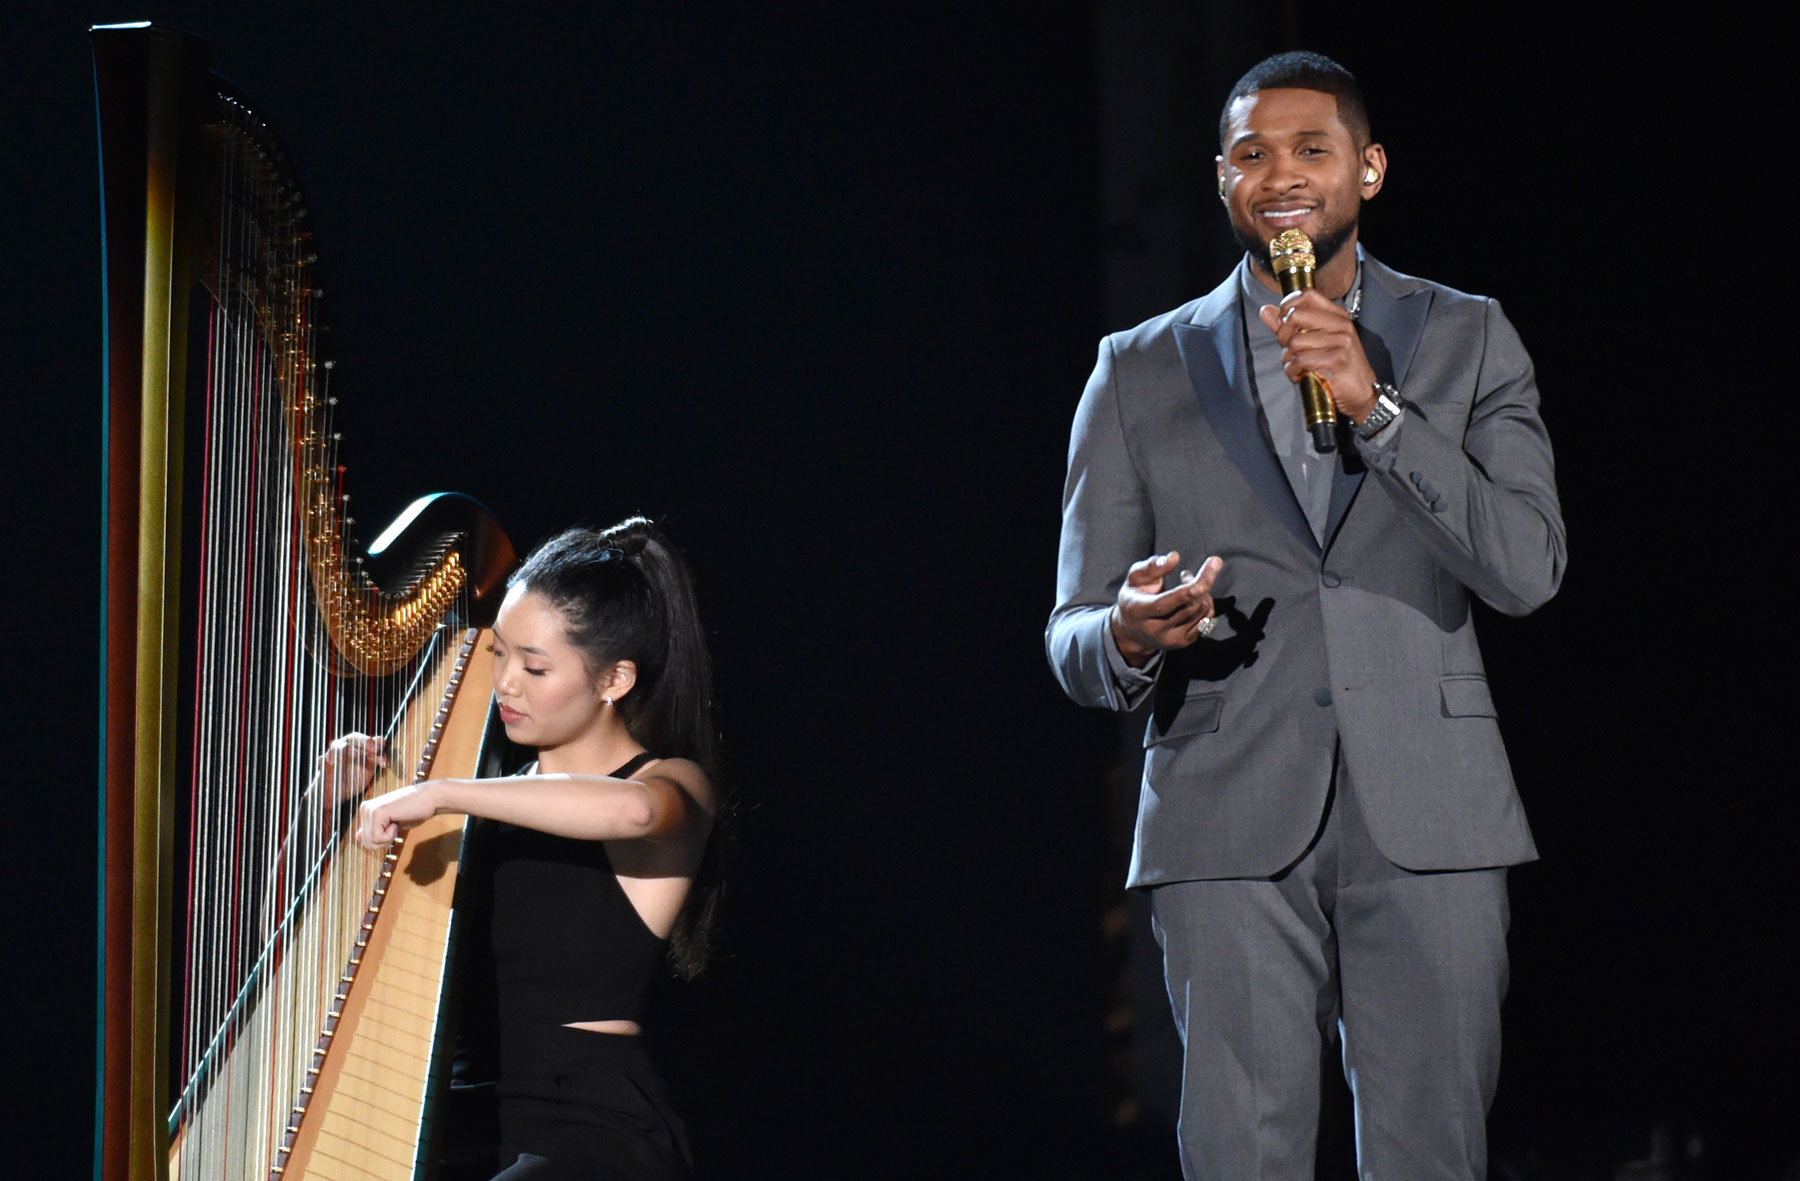 Usher performs at the 57th annual Grammy Awards on Sunday, Feb. 8, 2015, in Los Angeles. (Photo by John Shearer/Invision/AP)